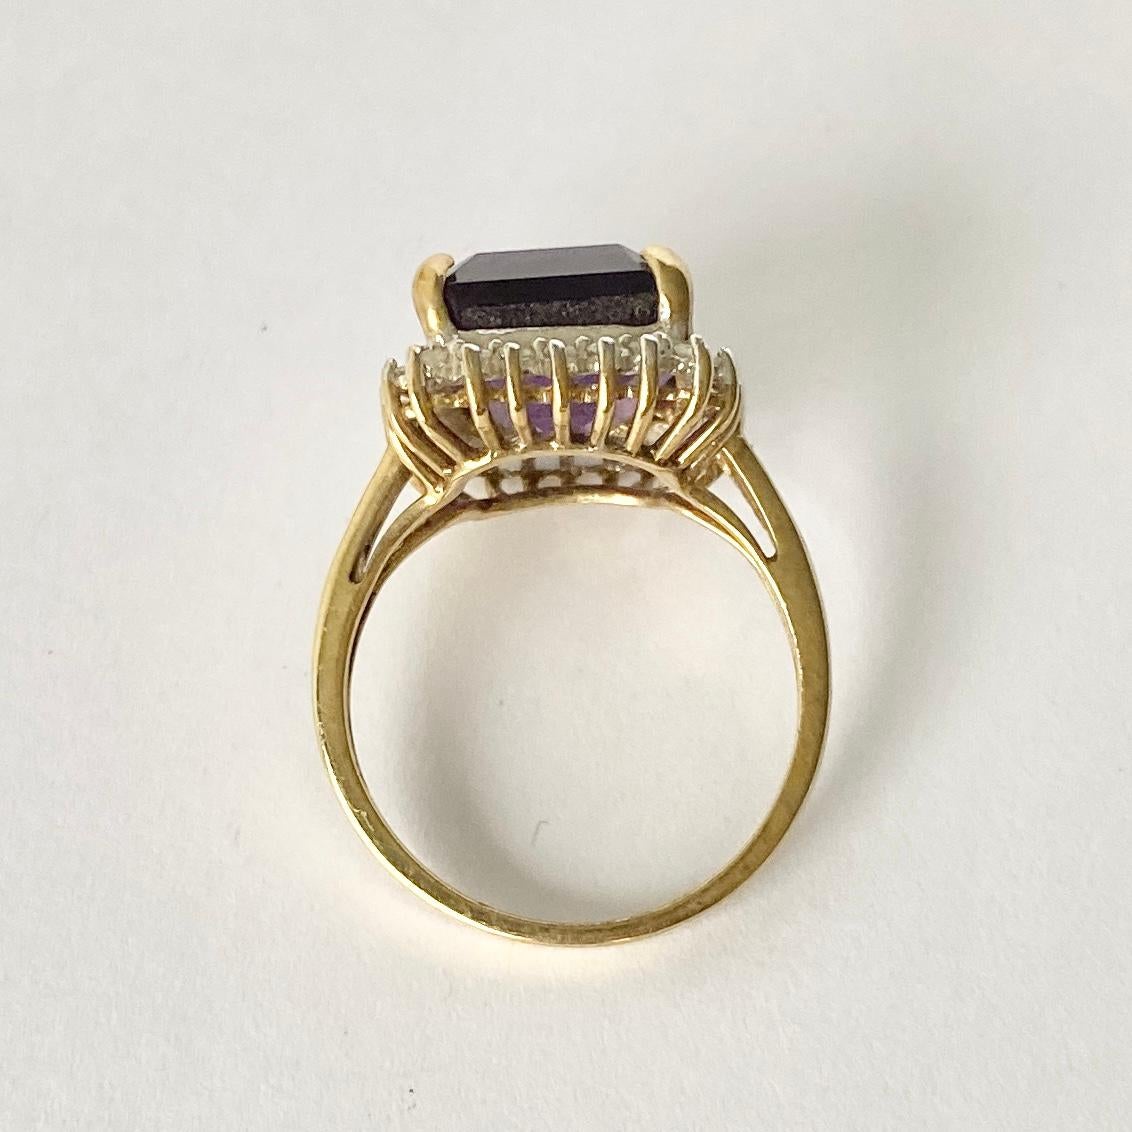 The gorgeous amethyst stone in this cluster is a bright purple colour which is complimented by the bright diamonds which surround it. The diamonds total approx 30pts. The ring is modelled in 9ct white gold.  

Ring Size: M or 6 1/4  
Cluster